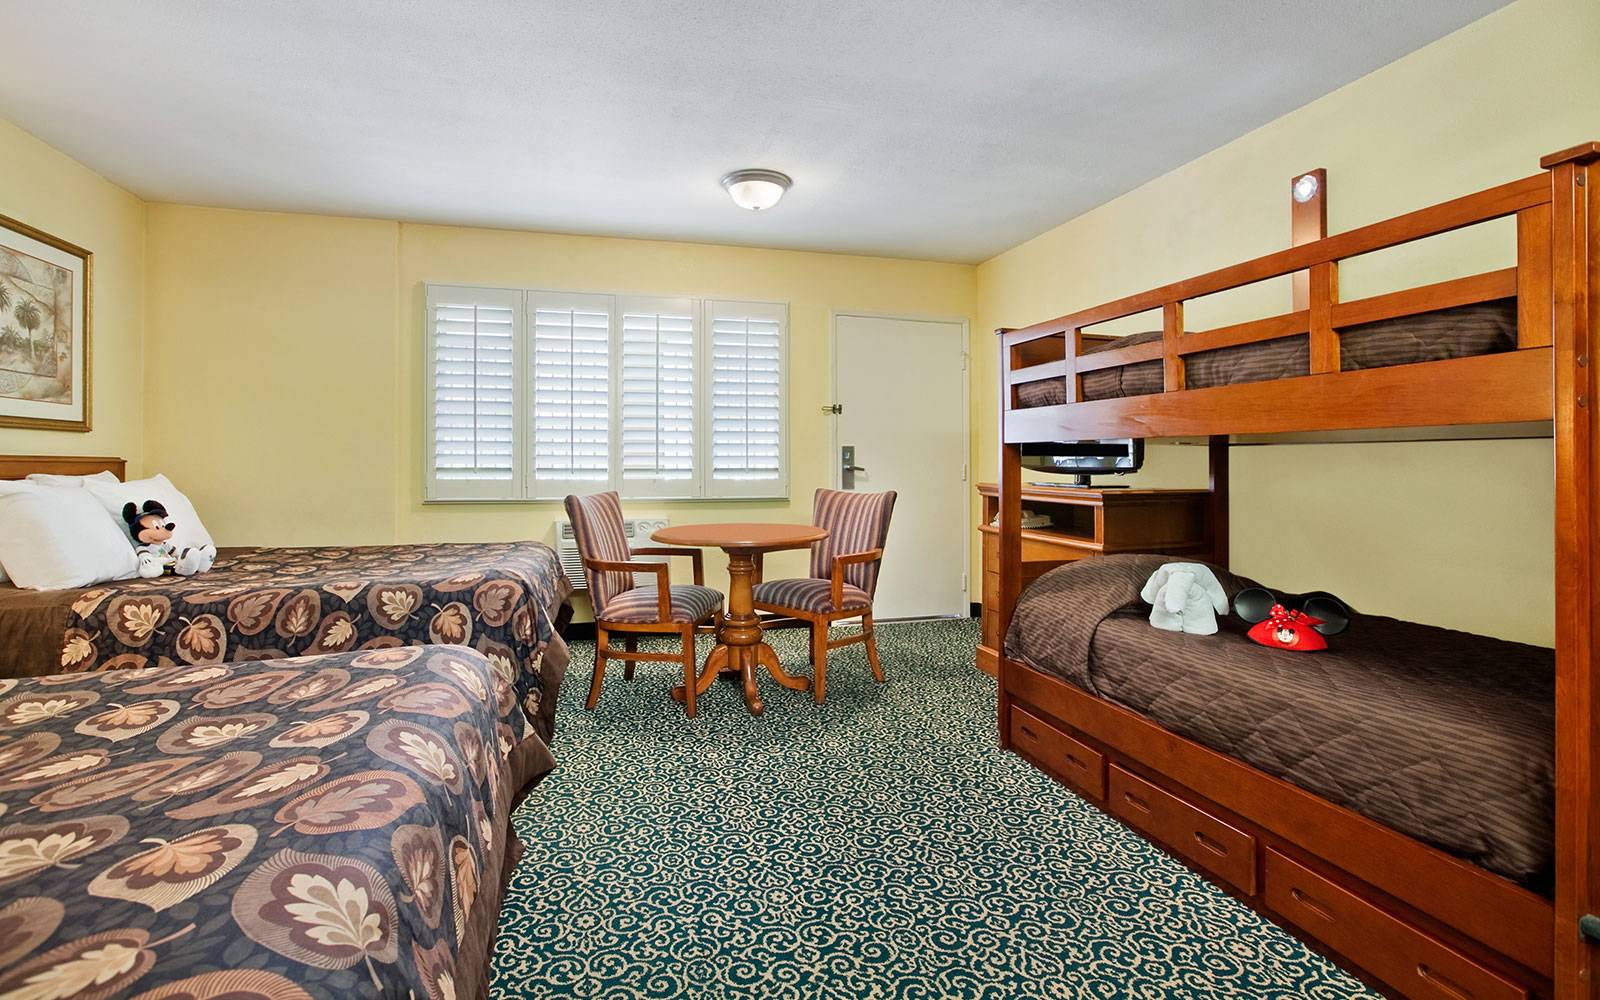 Anaheim Hotel Rooms Accommodations, Hotels In Anaheim With Bunk Beds